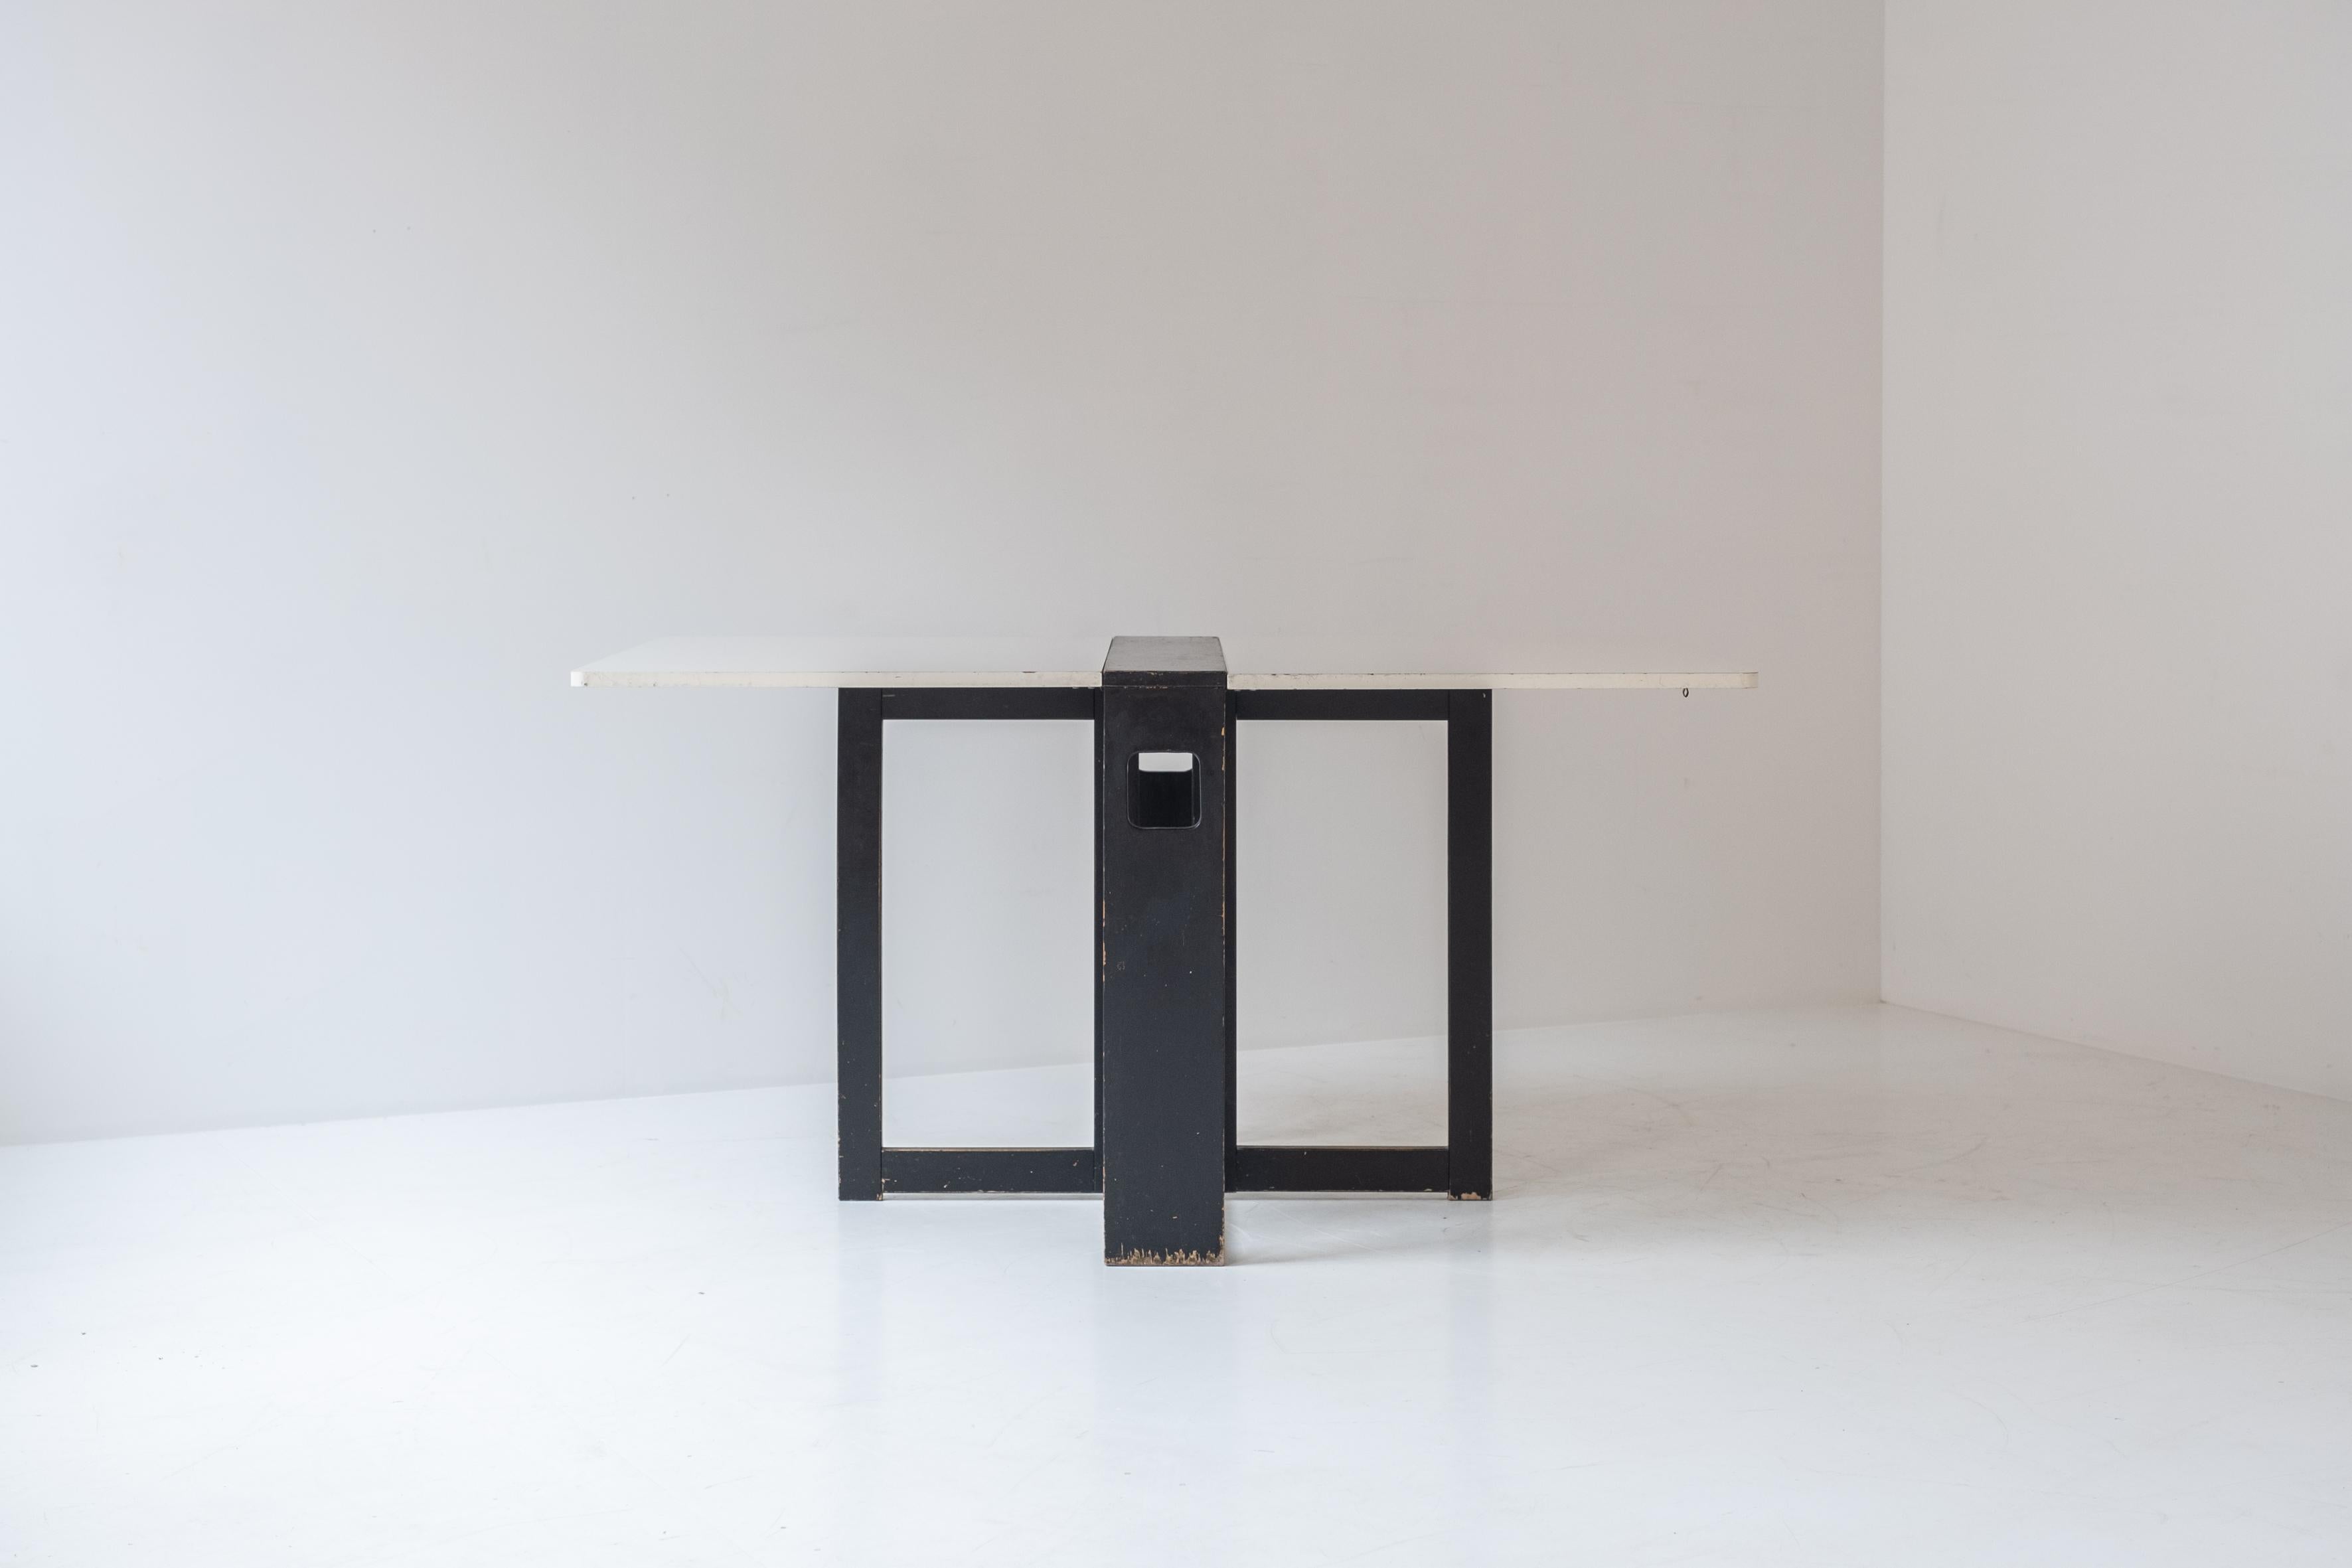 Extendable dining table with architectural base, Belgium 1960s. This folding table features two extensions and can therefore be set up in multiple positions depending on your needs. The base is made out of black lacquered wood and the extensions